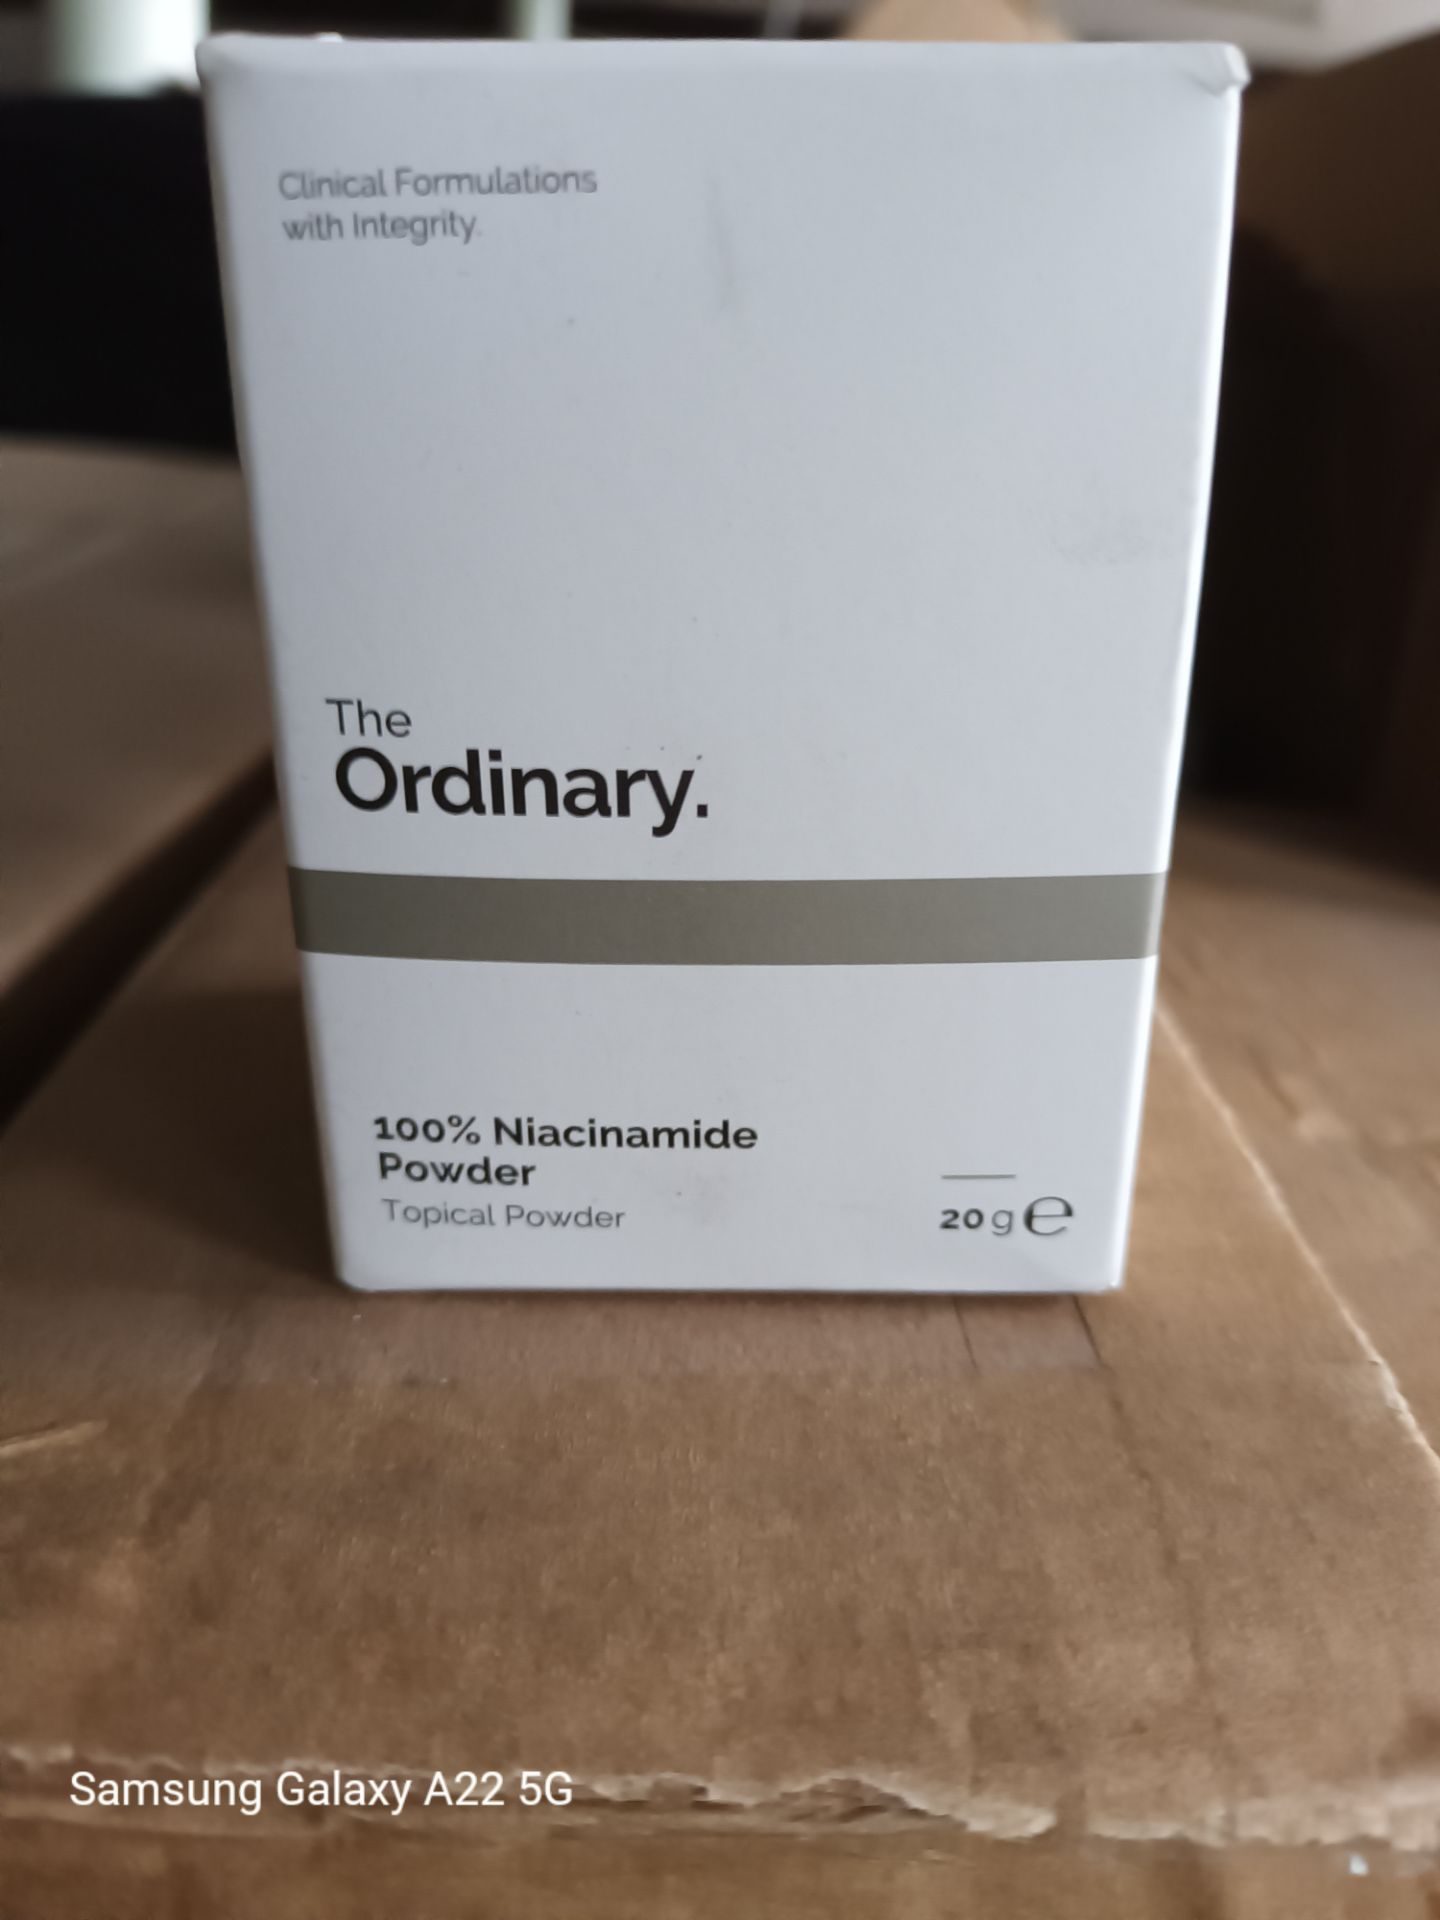 PALLET OF 2220 ABNORMAL BEAUTY COMPANY 20G NIACINAMIDE POWDER - Image 2 of 2